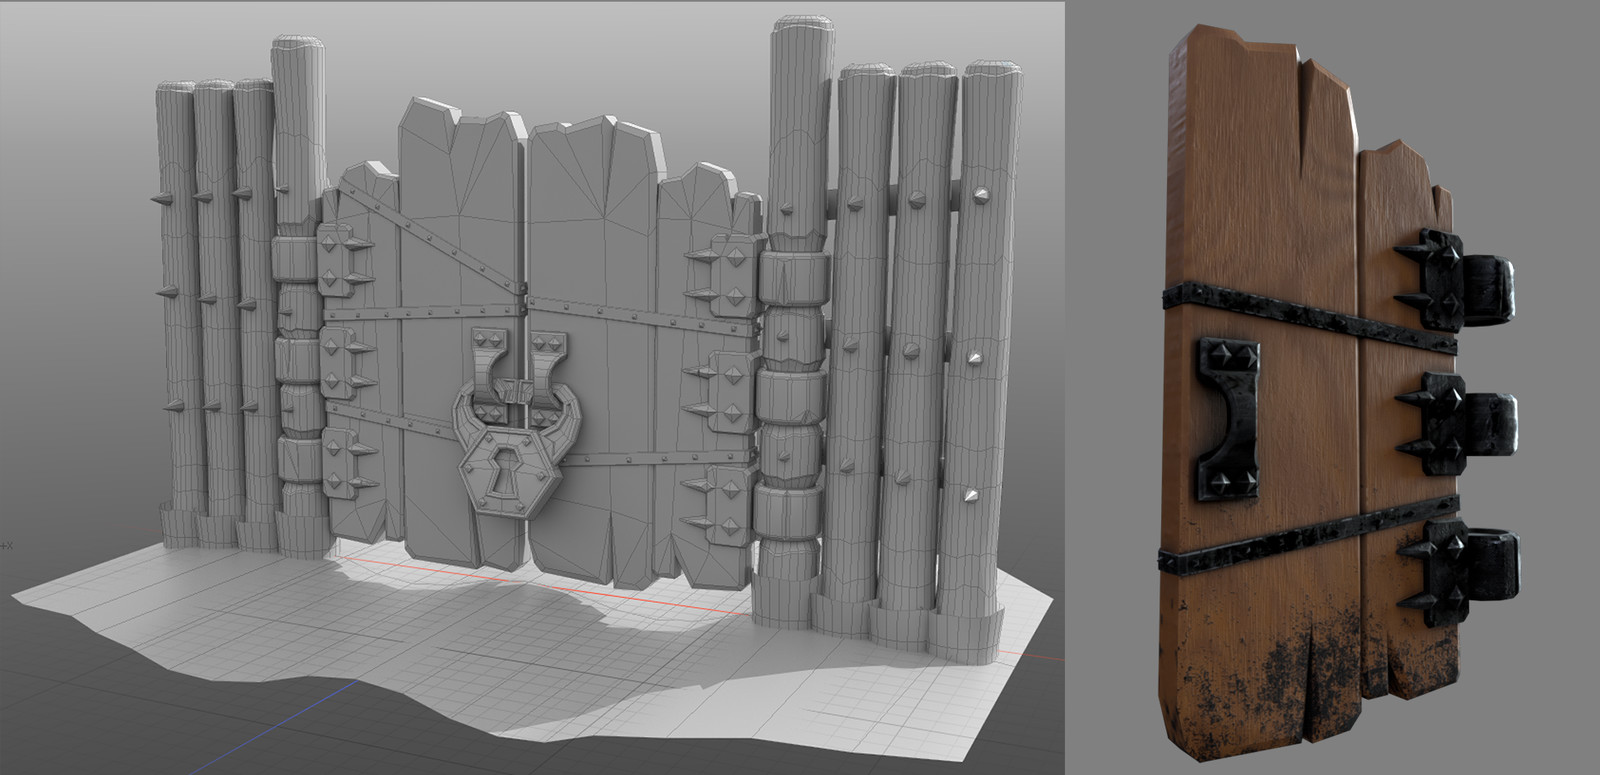 When I decided to texture this asset myself I needed to up the detail a bit. I also swapped out the ropes with metal strapping after doing some initial material tests.
Modeled in Modo.
Textured in Substance Designer.